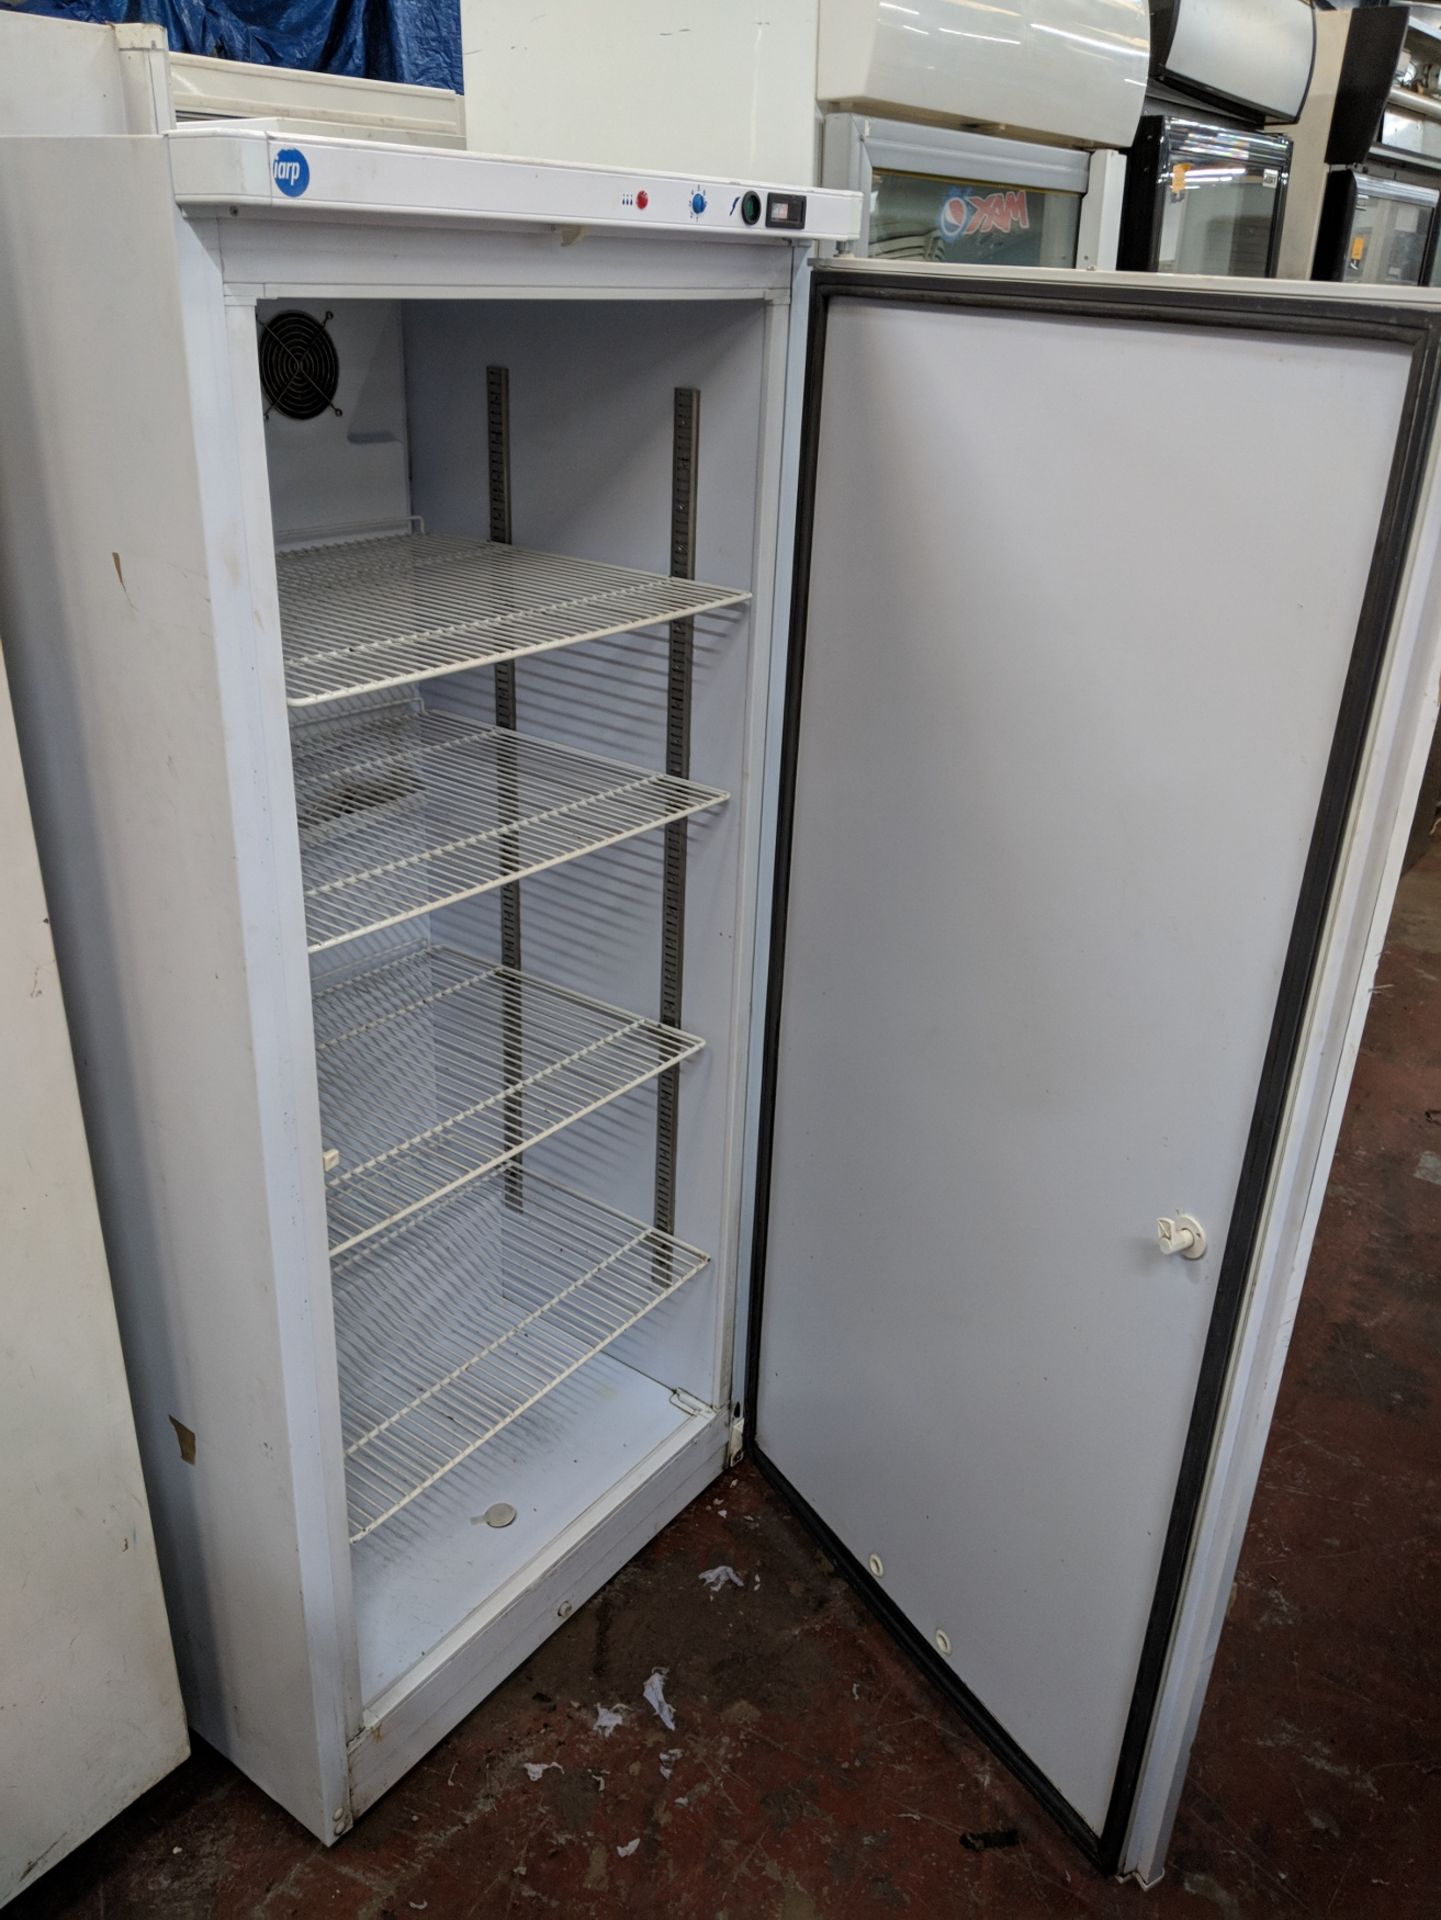 Iarp large white wide fridge, model AB500PV IMPORTANT: Please remember goods successfully bid upon - Image 2 of 3